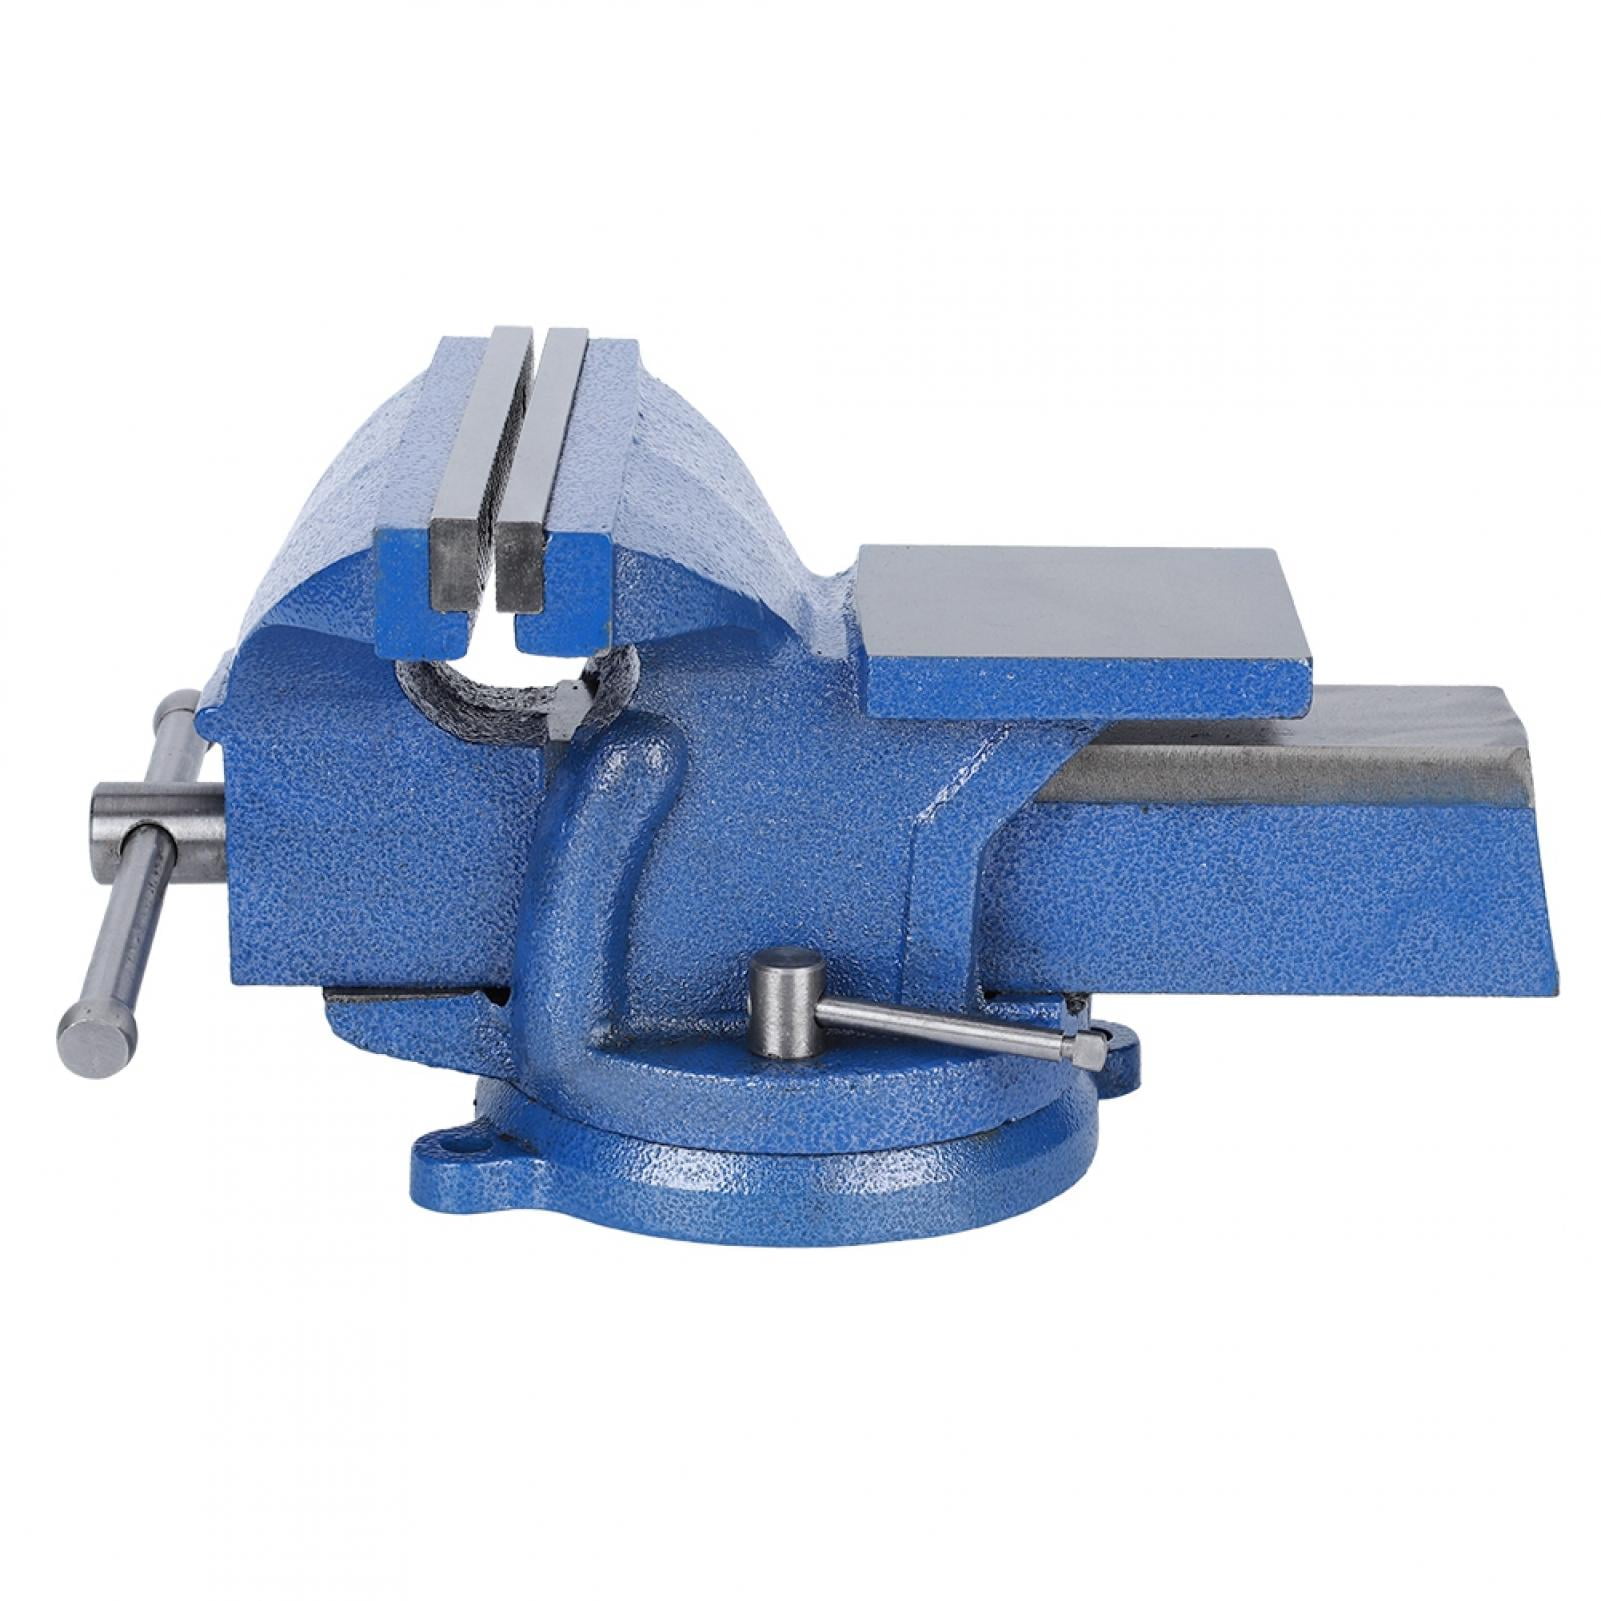 Table Vise Anvil Tool Drilling Machines Accessory Forging Jaw Cast Iron 8" 200mm 